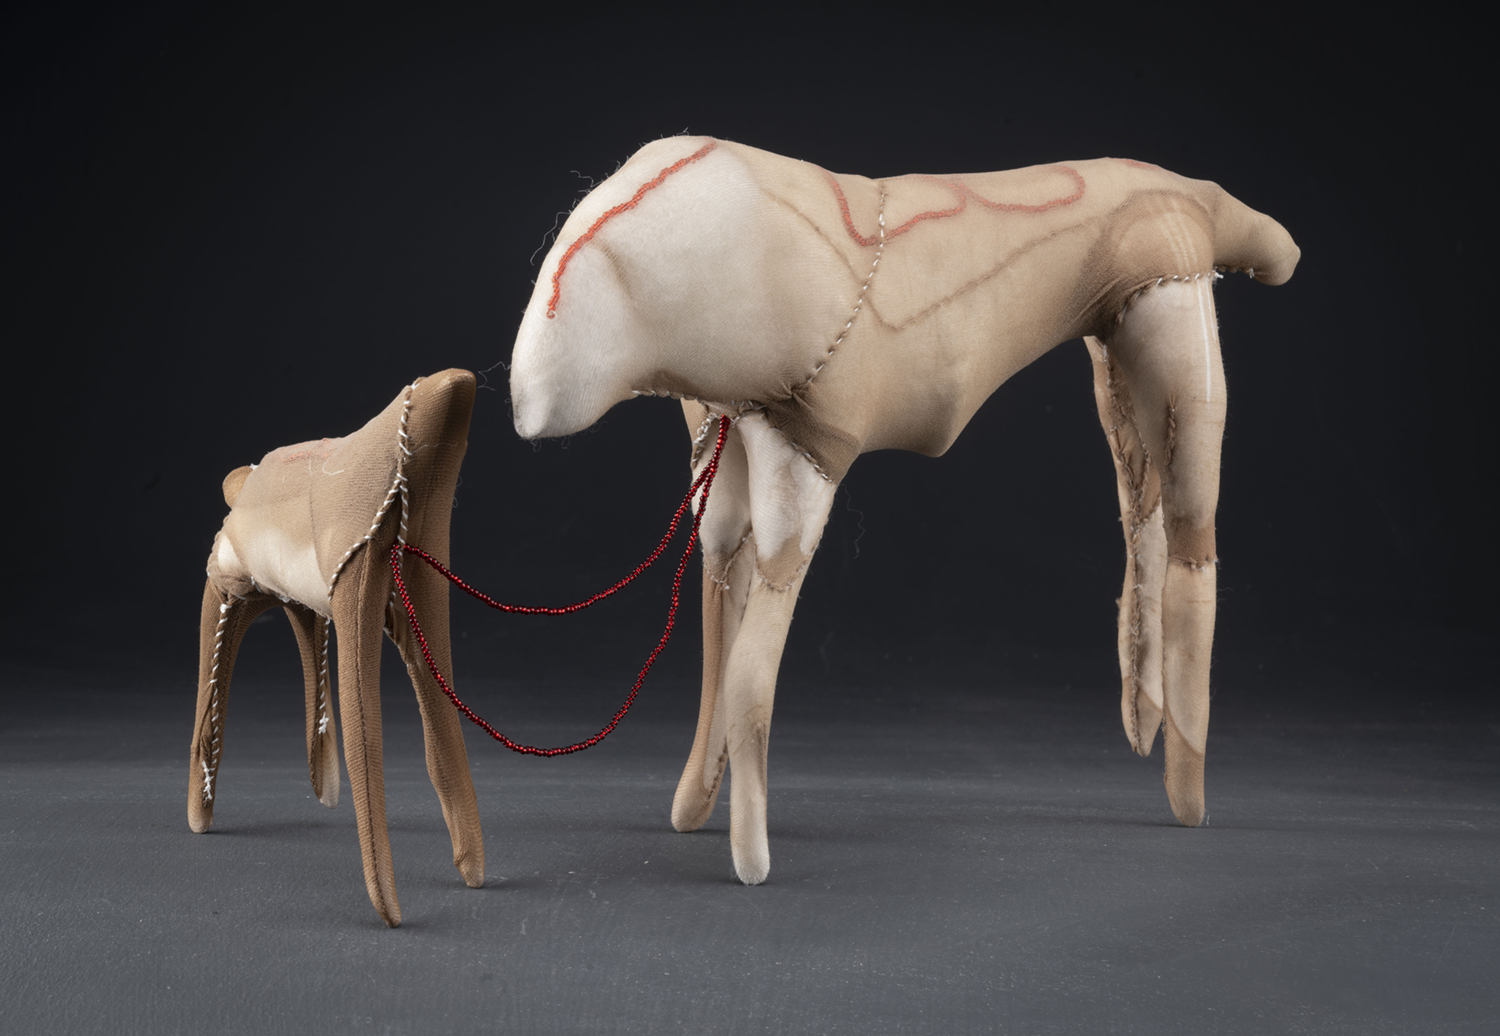 Sculptures of a mother moose and her calf, courtesy of the artist